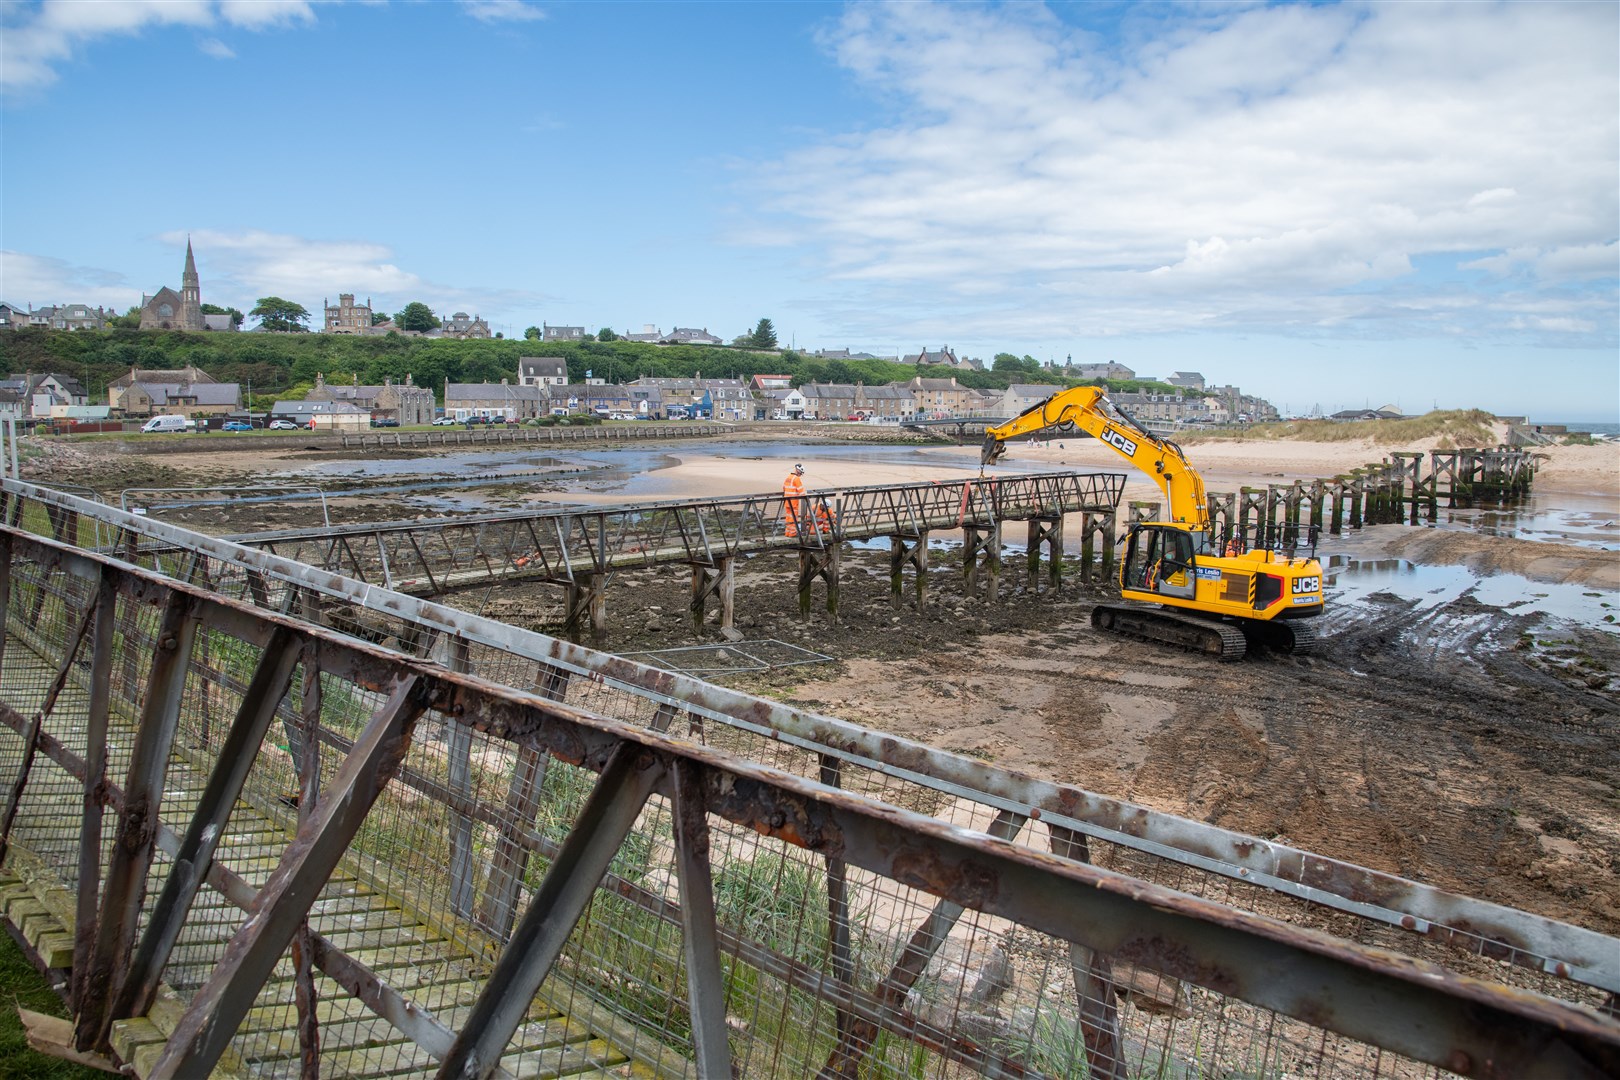 The wooden bridge has been replaced by a modern £1.8 million steel bridge. Picture: Daniel Forsyth